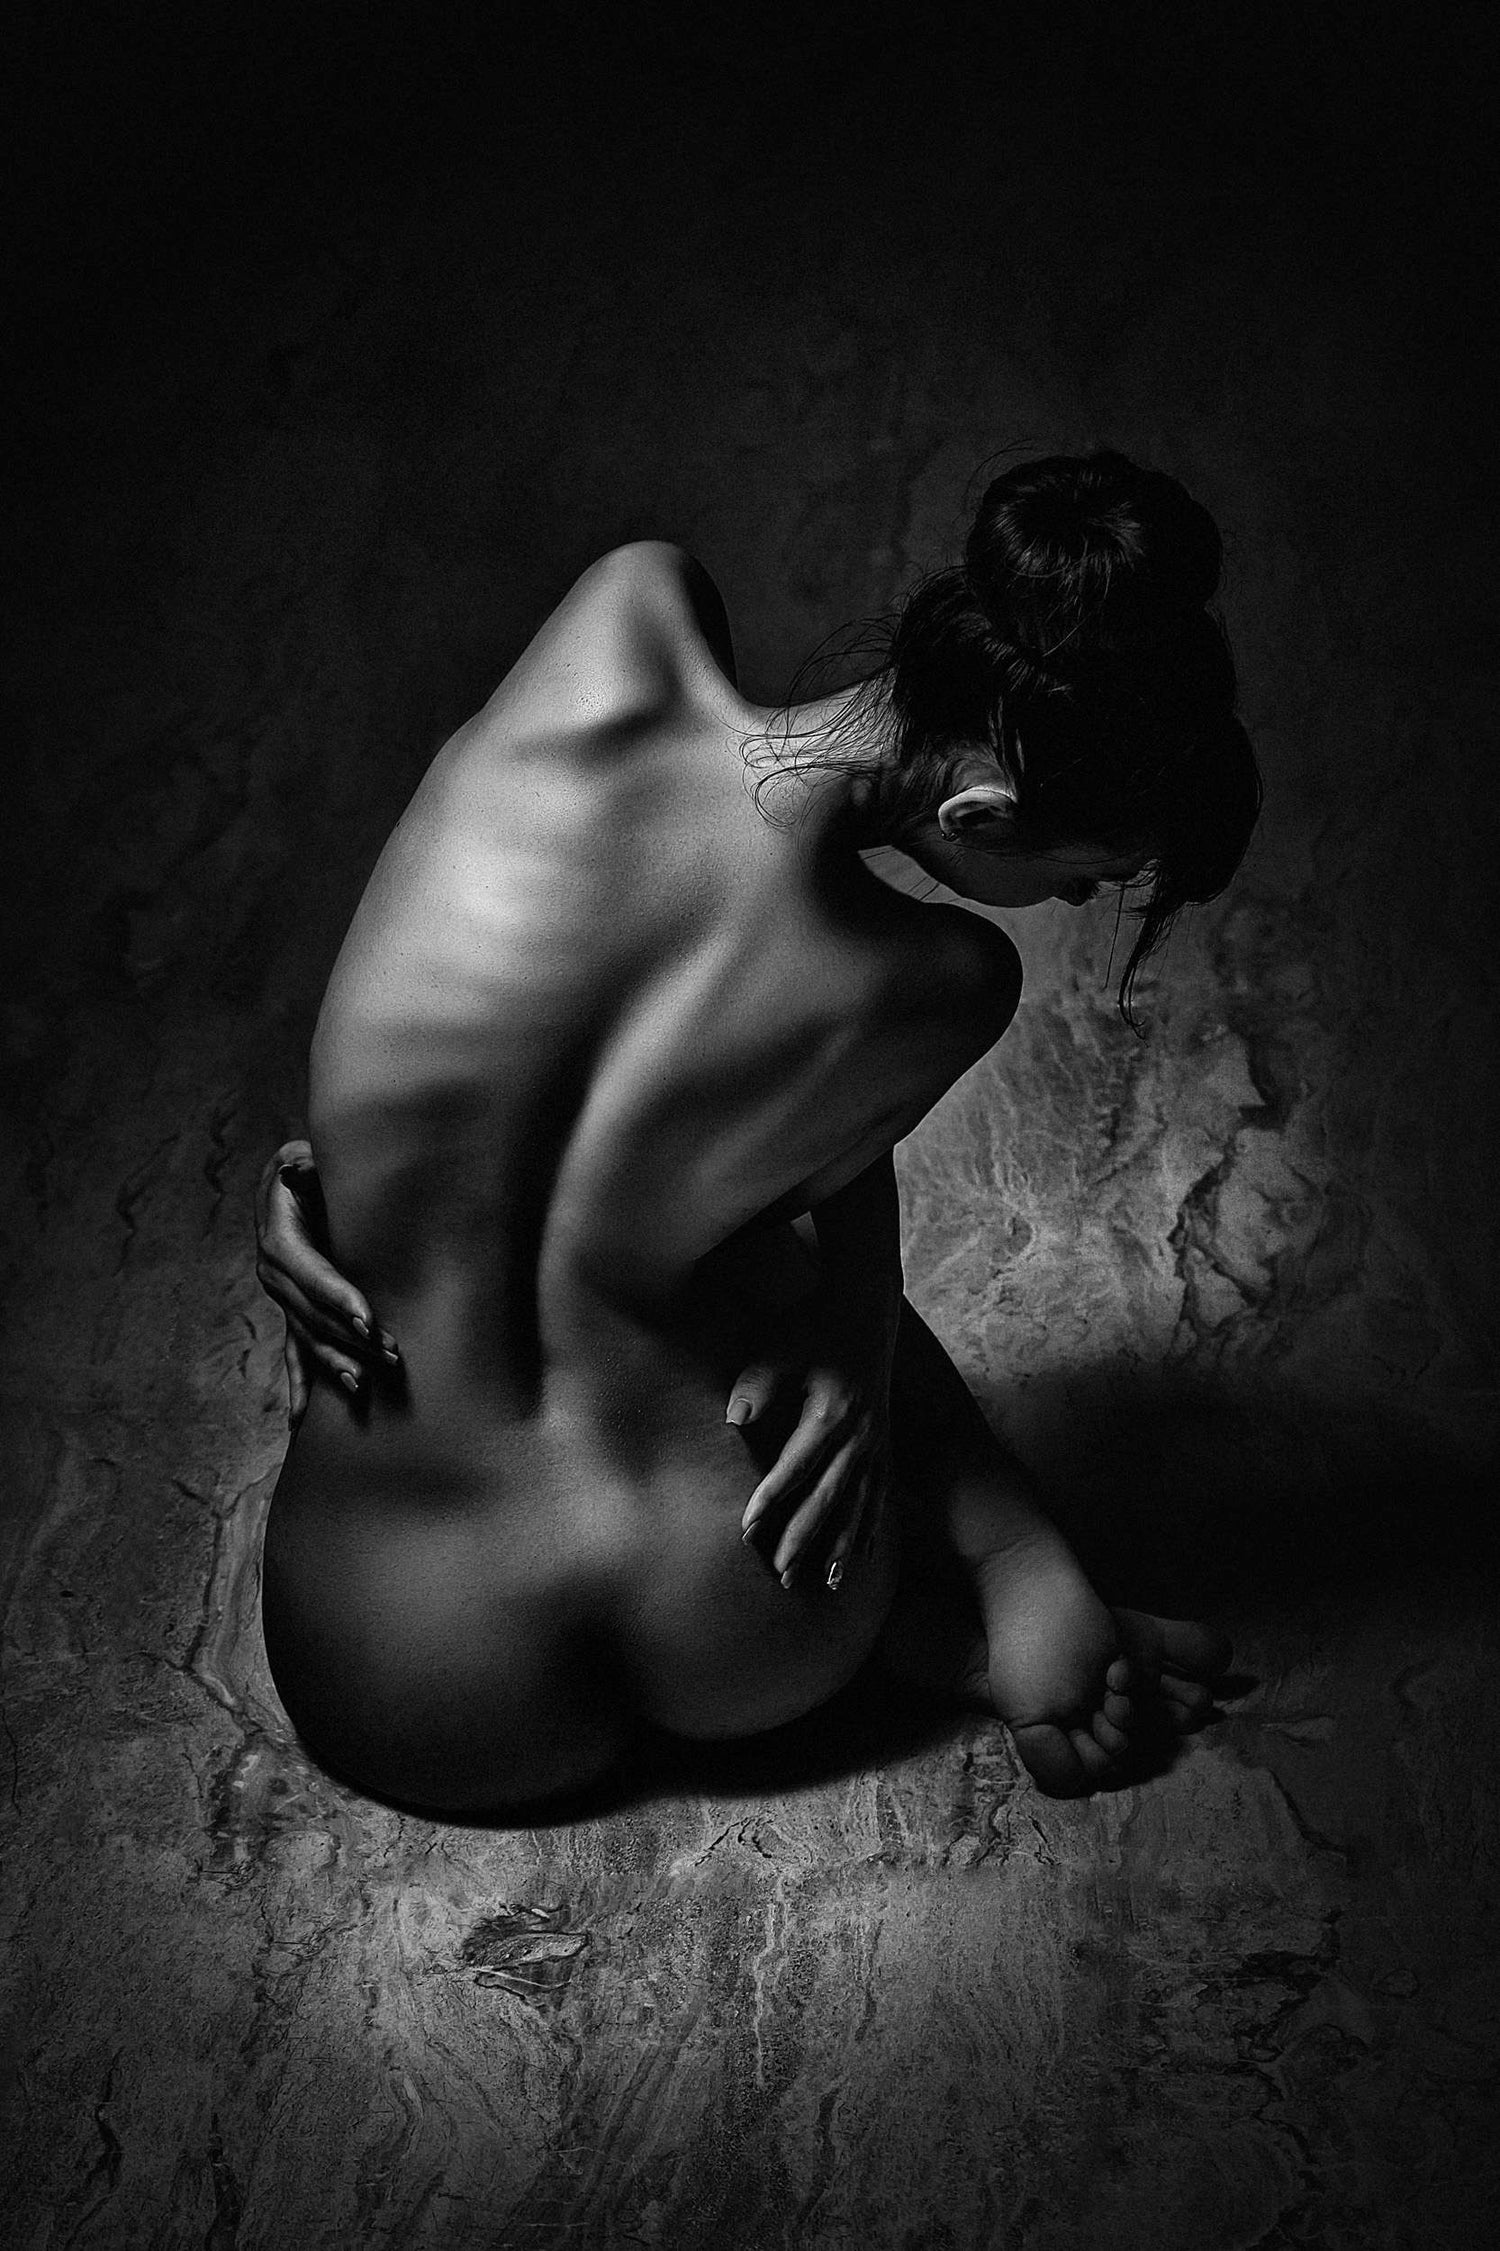 Woman seated on a wood-patterned floor, her back illuminated, creating a play of lines and curves, captured in black and white by Ruslan Bolgov.